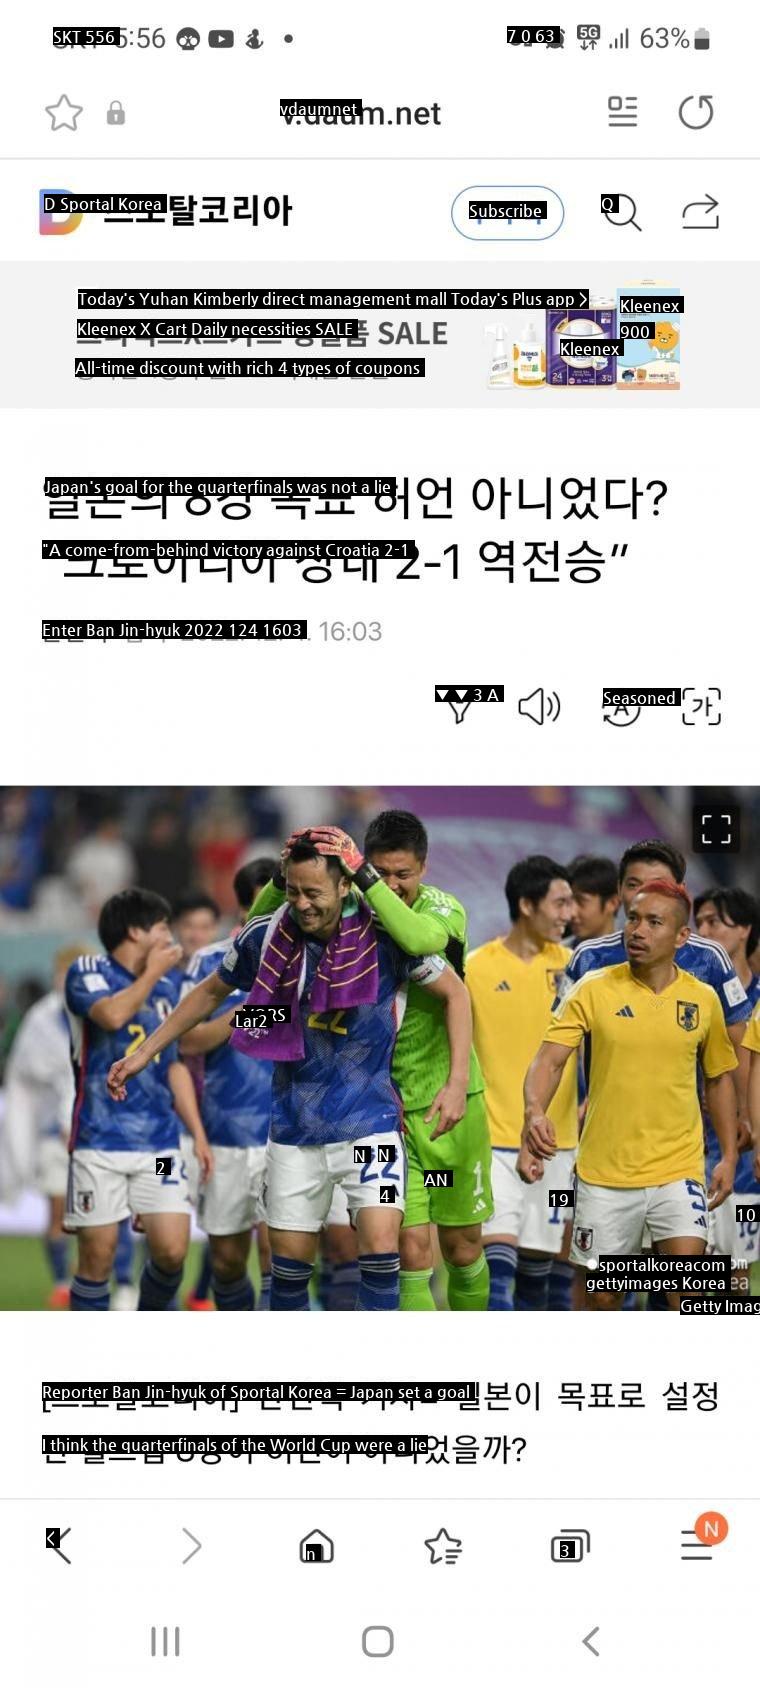 The article about the Korean flag Croatia and Japan match is already out